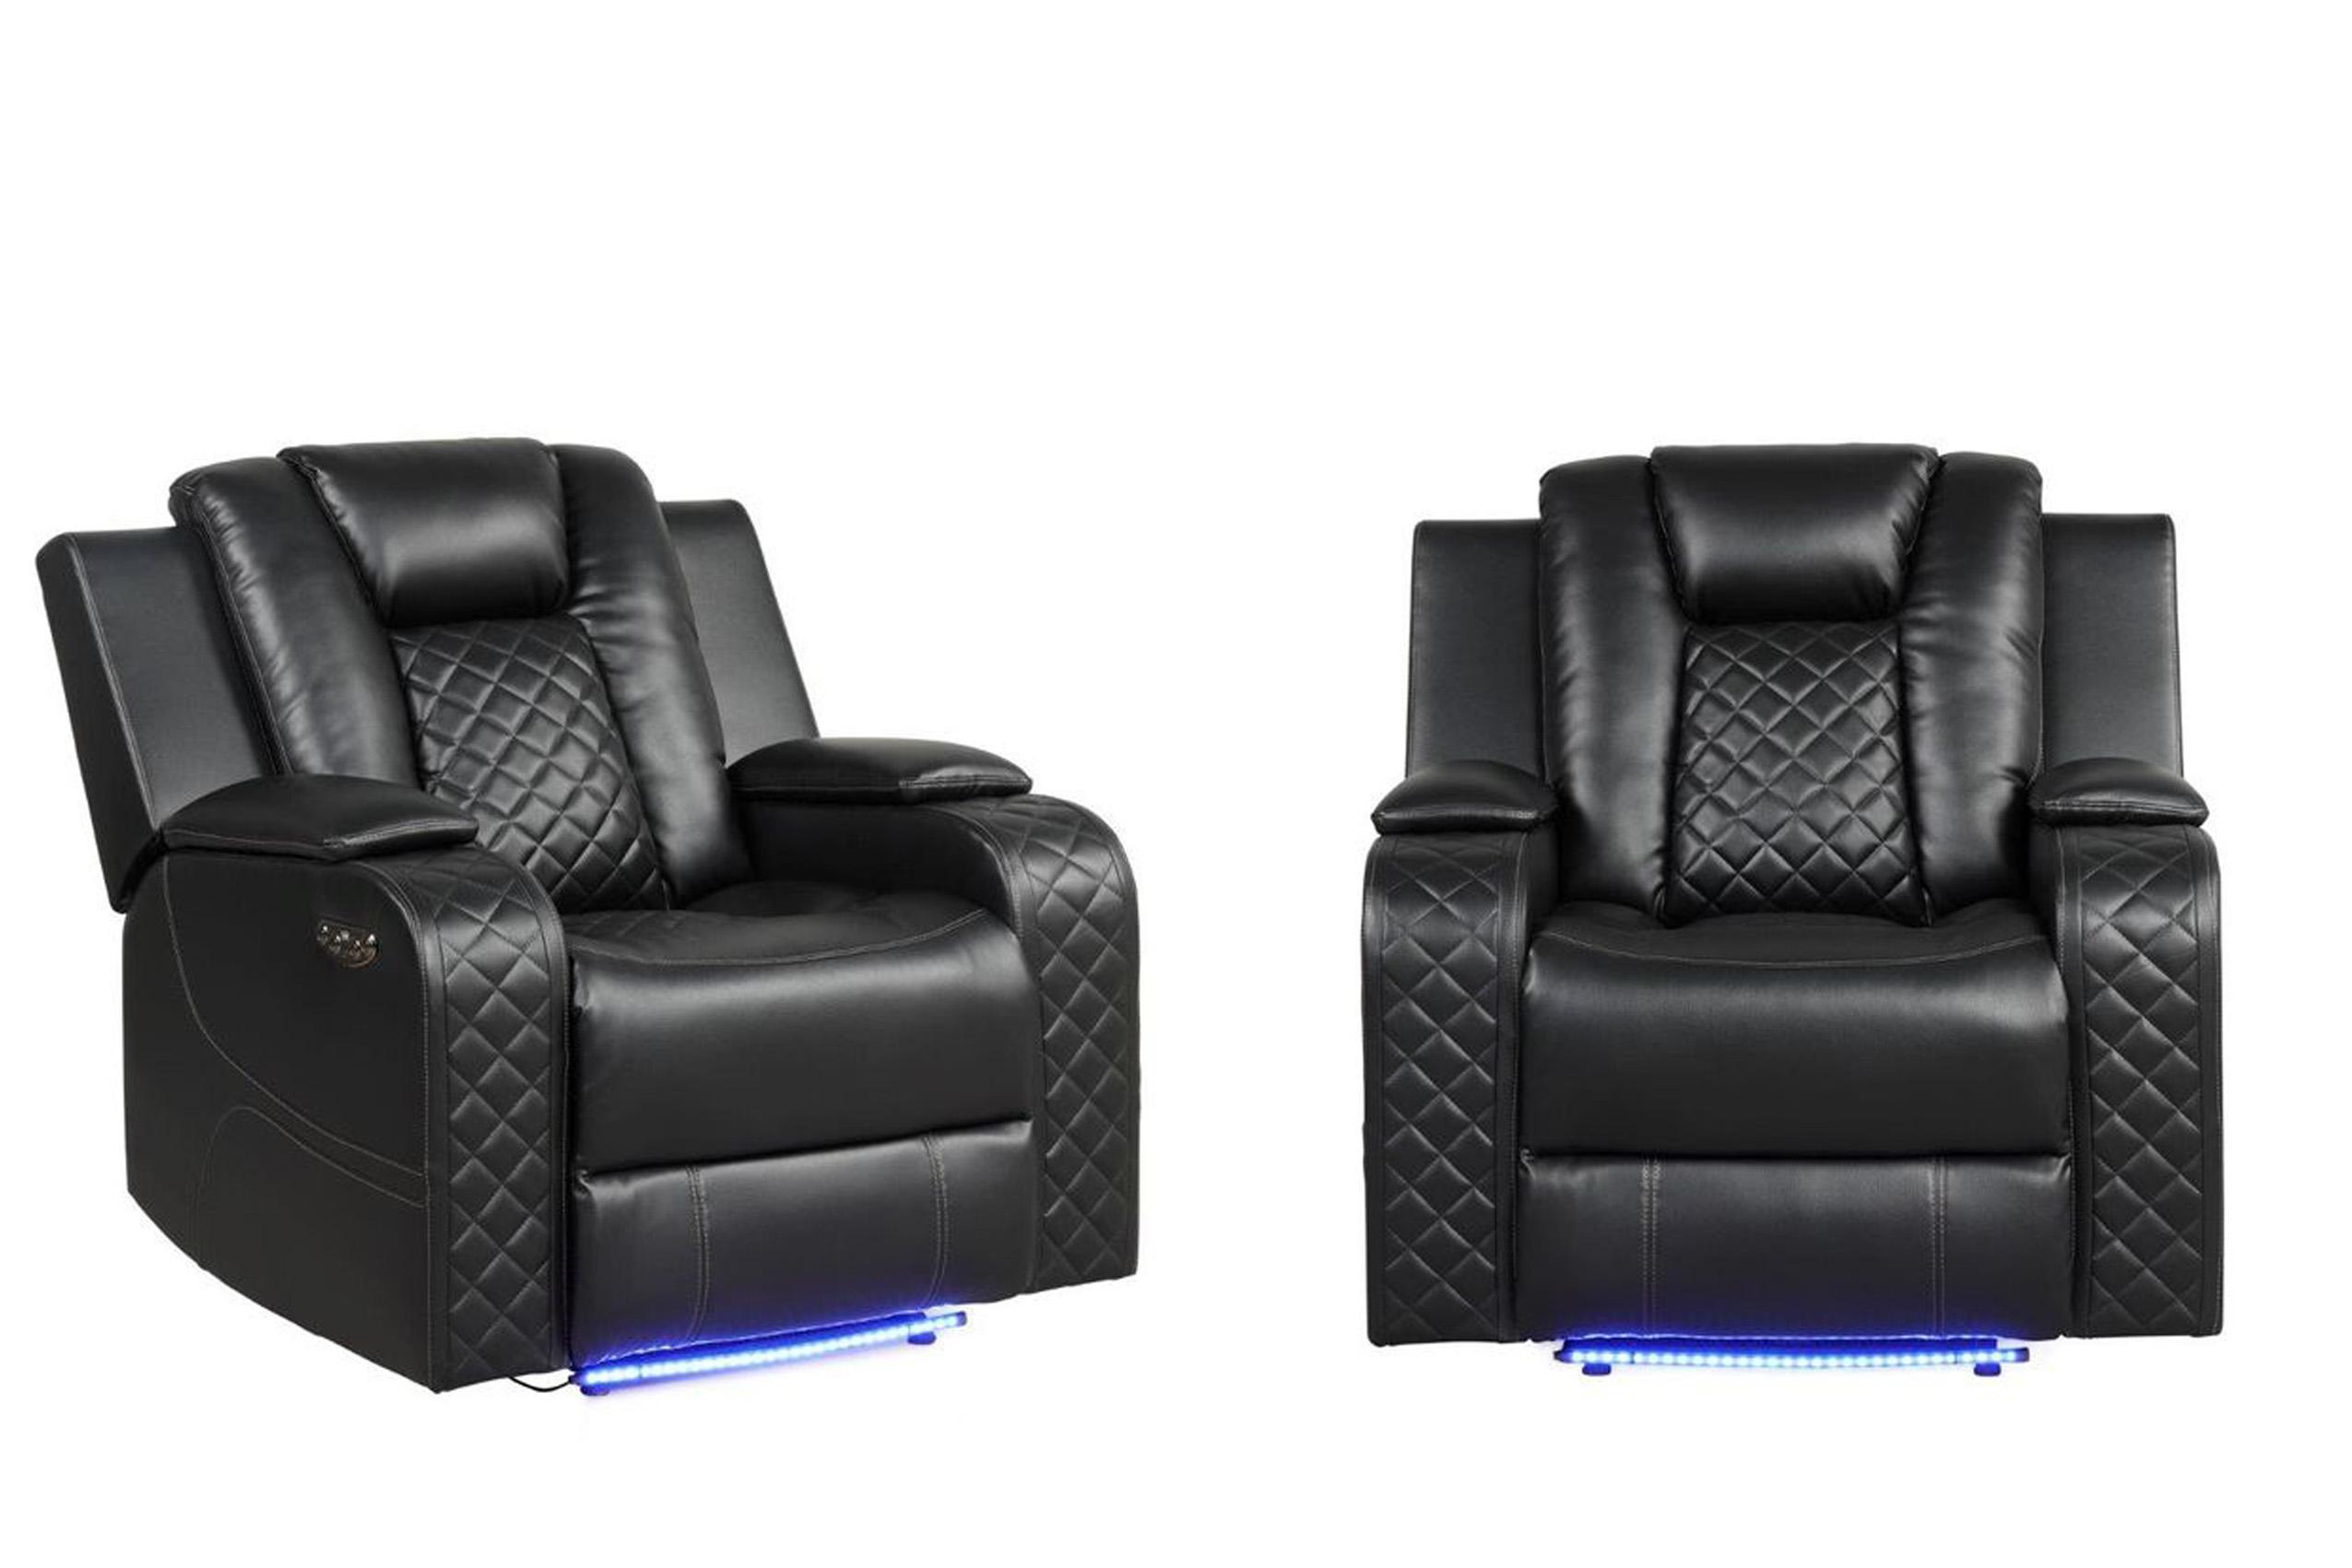 Contemporary, Modern Recliner Chair Set BENZ 659436350137-2PC in Black Faux Leather